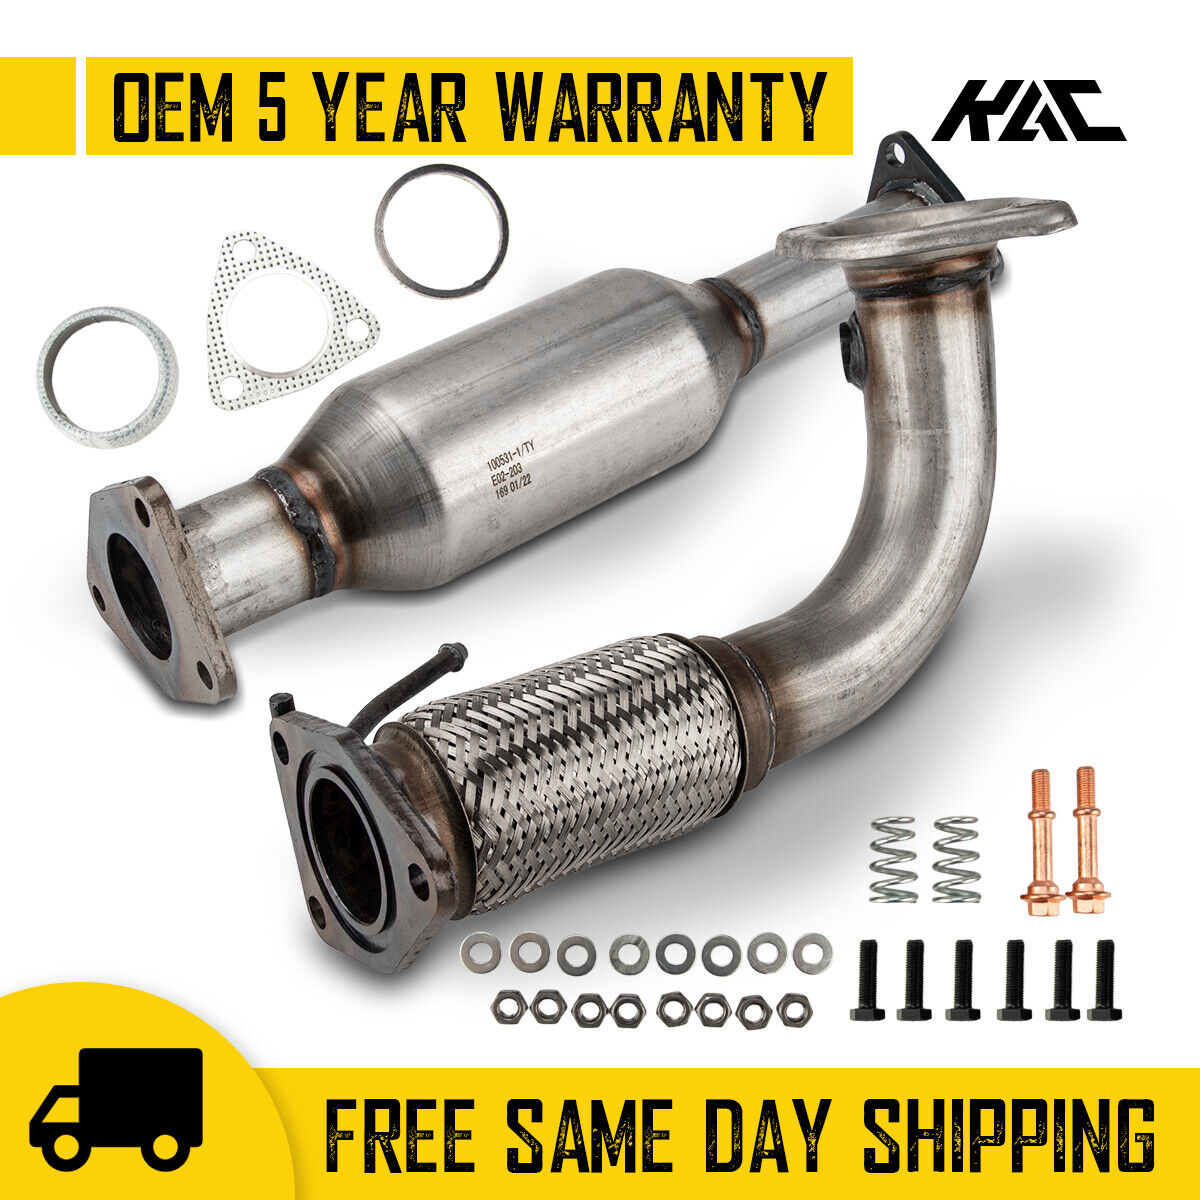 Catalytic Converter And Flex Pipe For 2003 2004 2005 2006 2007 Honda Accord 2.4L